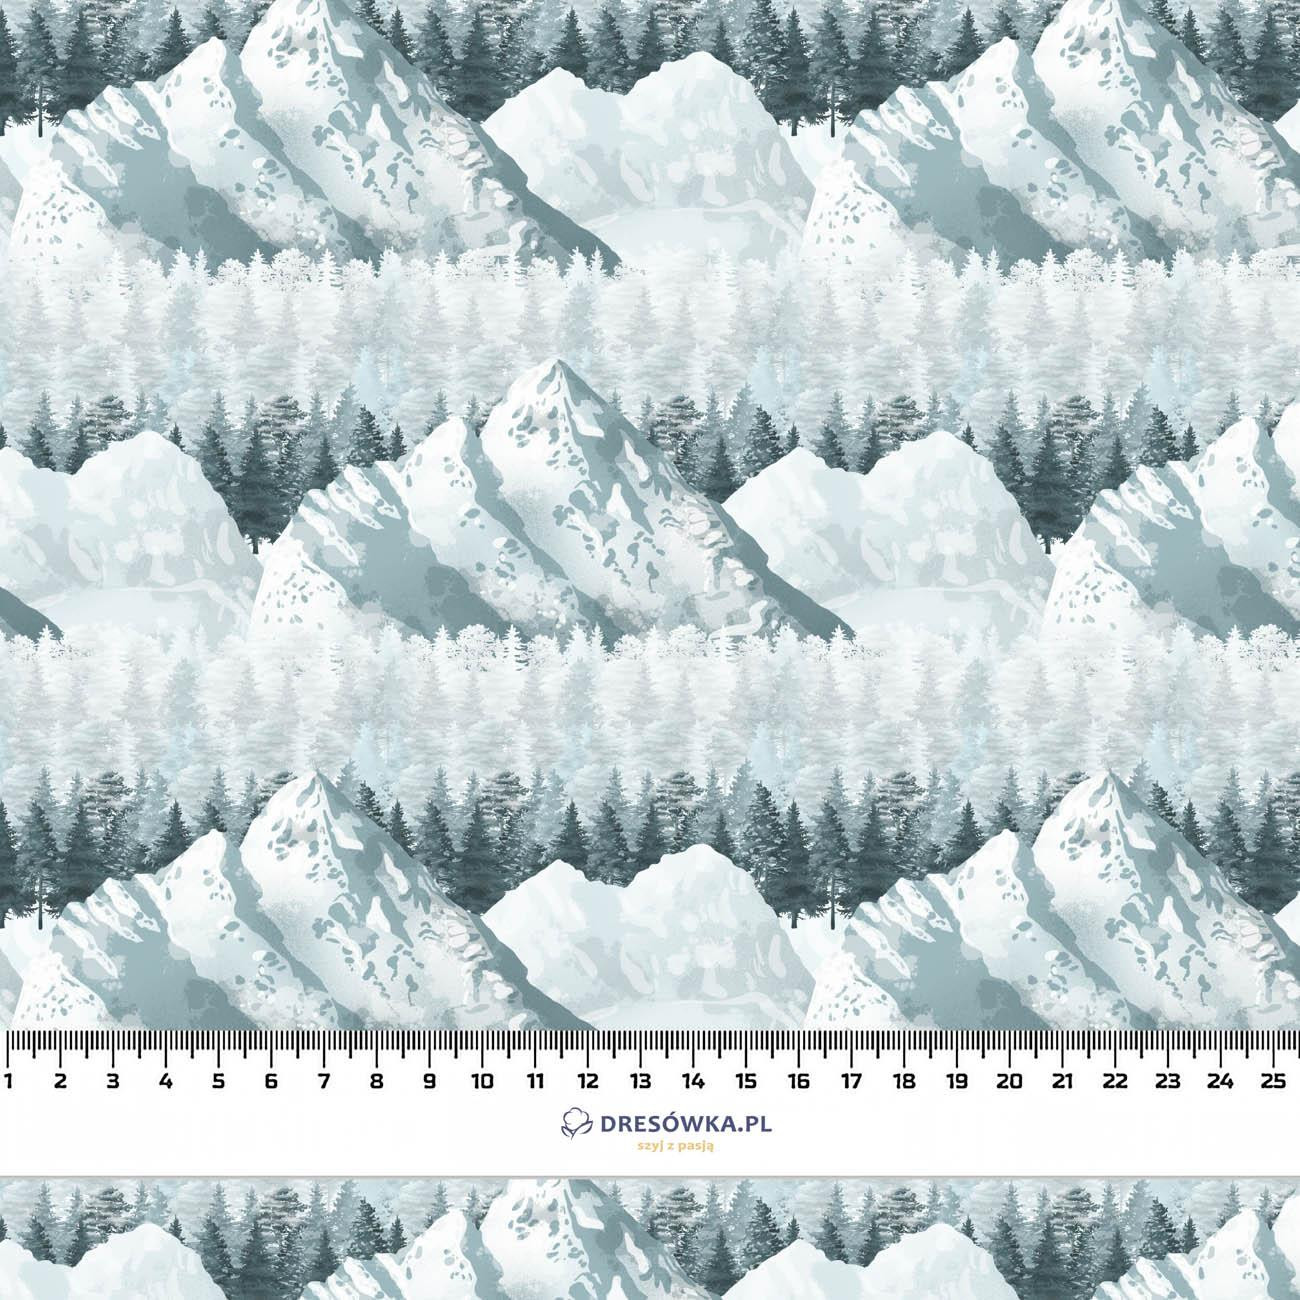 SNOWY PEAKS (WINTER IN THE MOUNTAINS) / small- Upholstery velour 